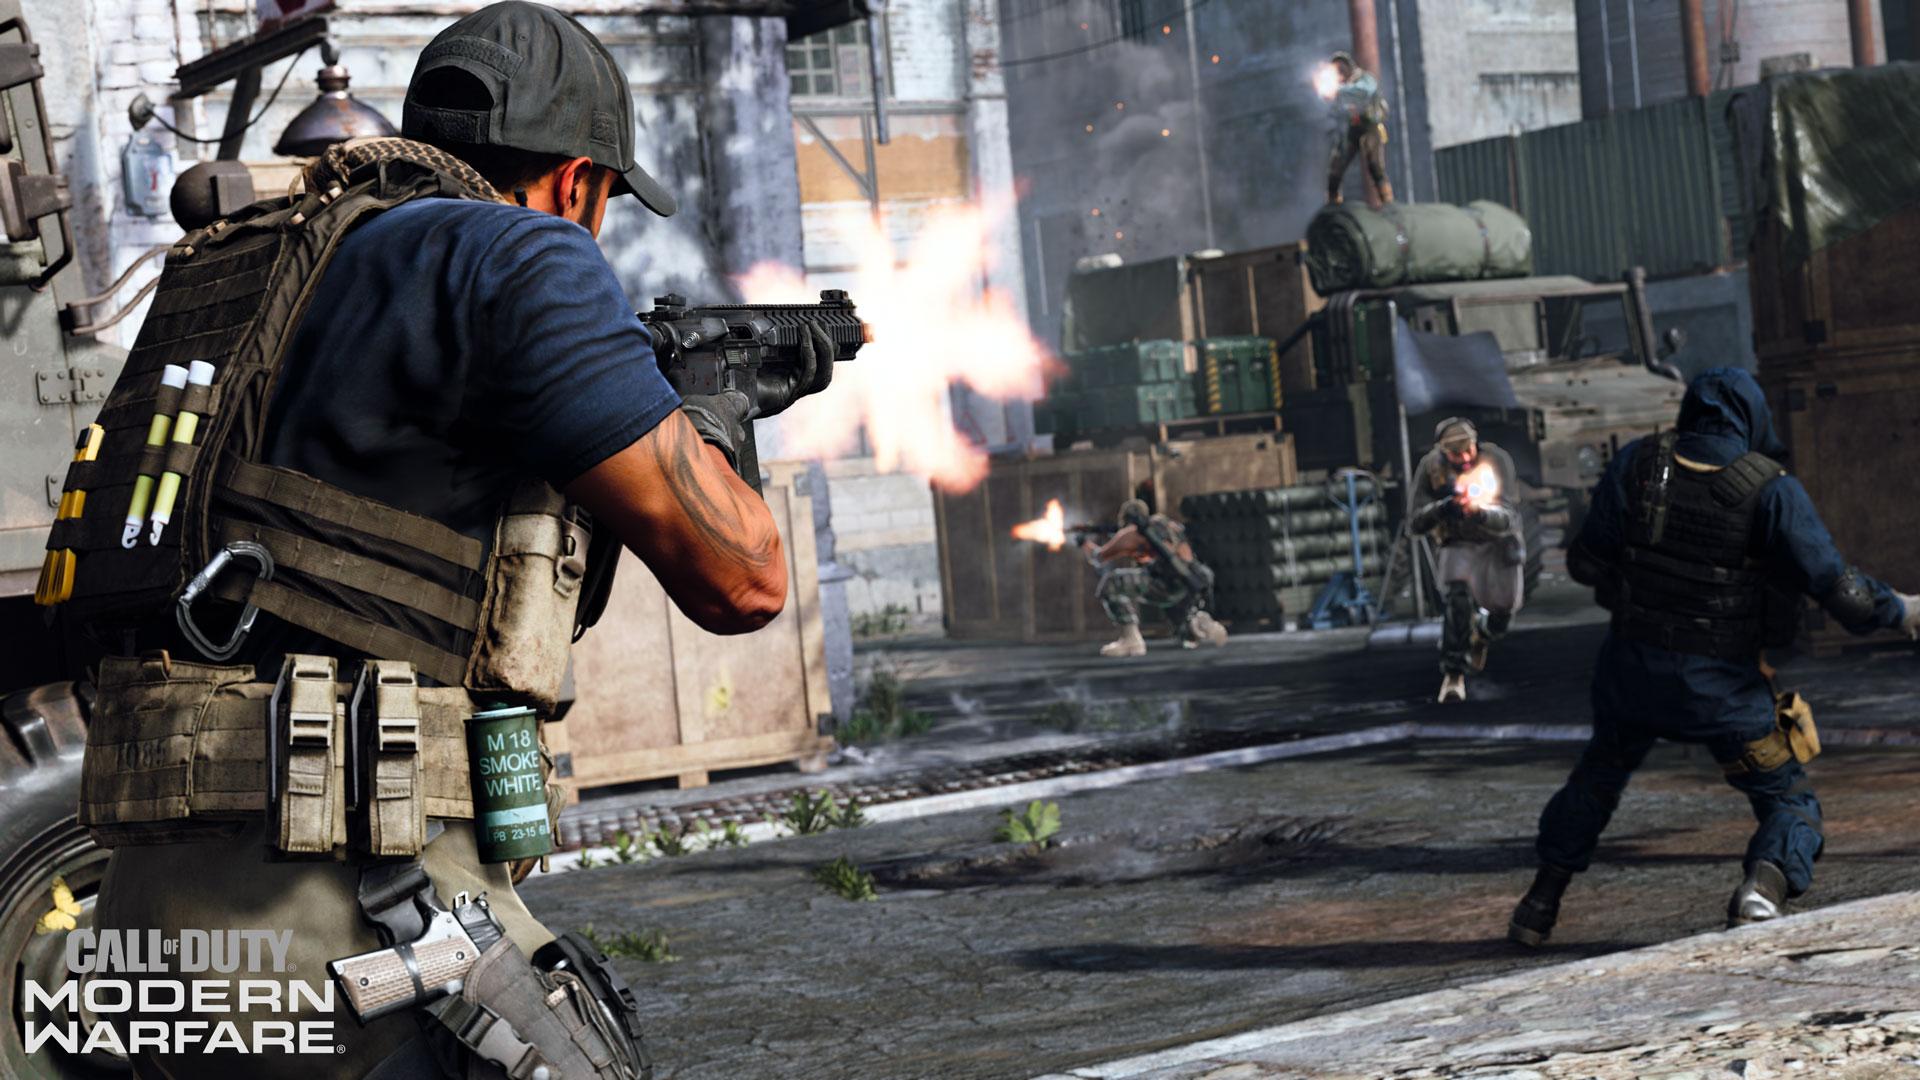 An image of Call of Duty characters engaged in a firefight.